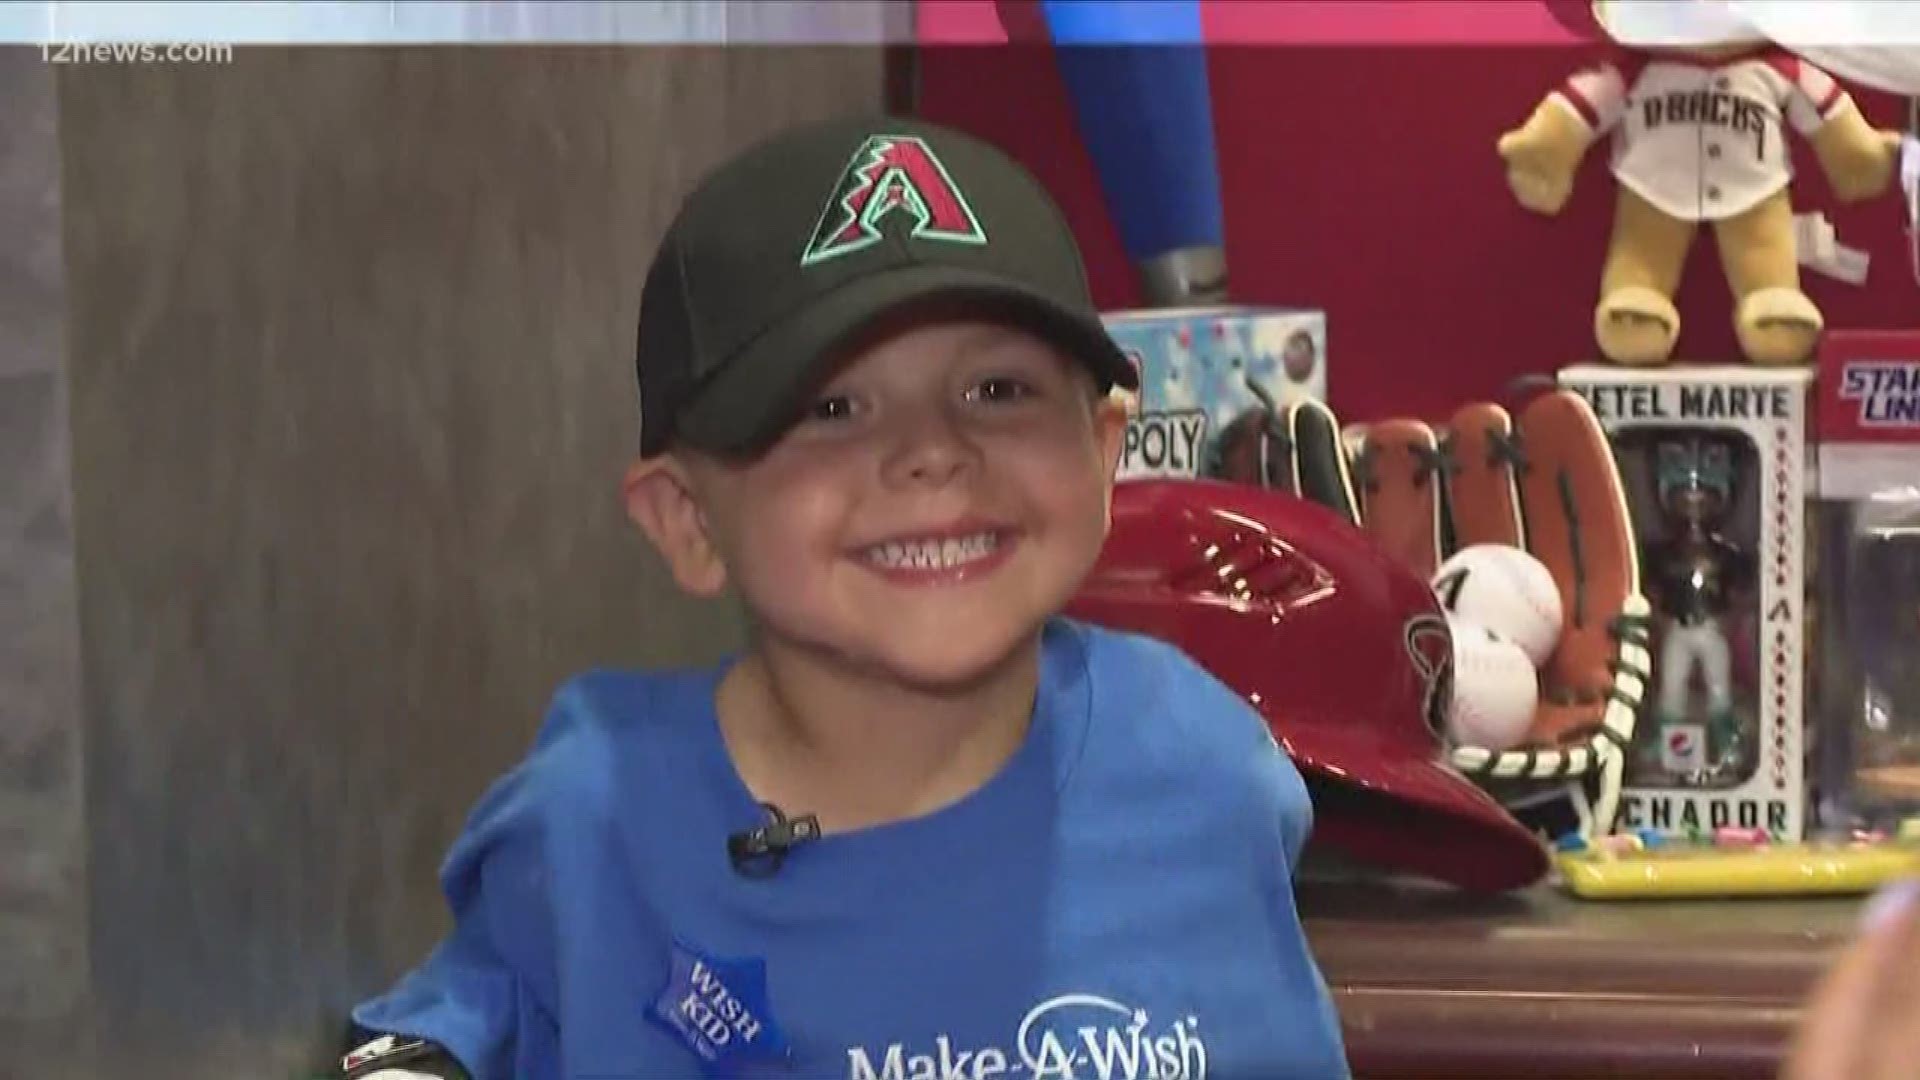 5-year-old Ayden Smith, who is currently being treated for leukemia, was granted a big wish by the Make-A-Wish Foundation. He got the chance to be an honorary member of the Diamondbacks for the day.